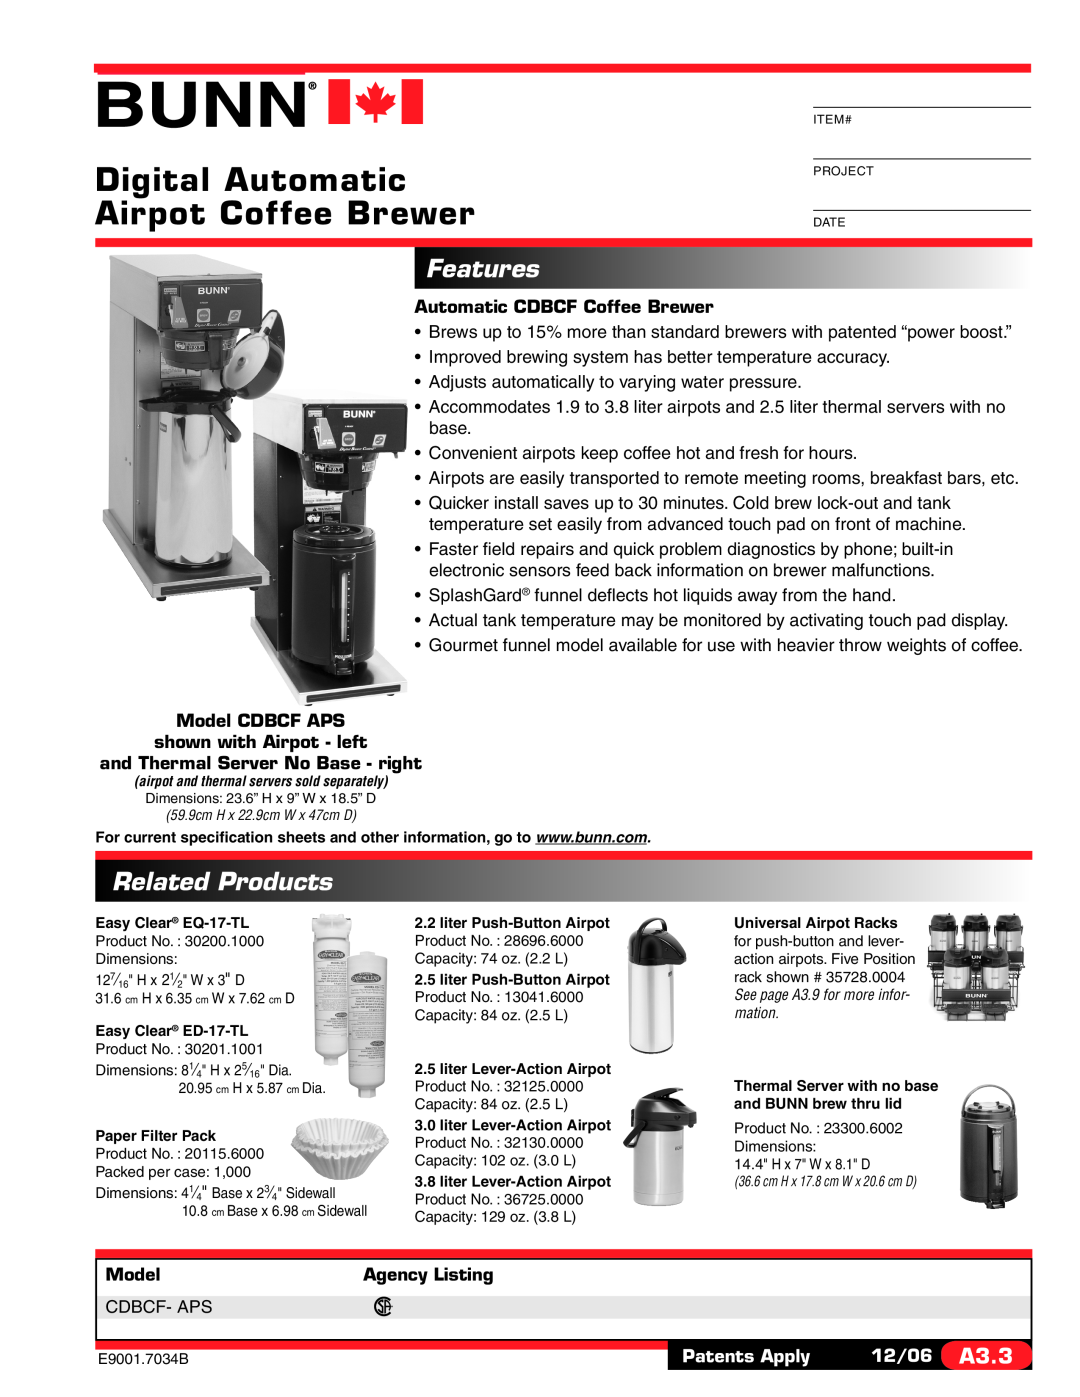 Bunn CDBCF- APS specifications Features, Related Products, Digital Automatic Airpot Coffee Brewer, Model, Agency Listing 